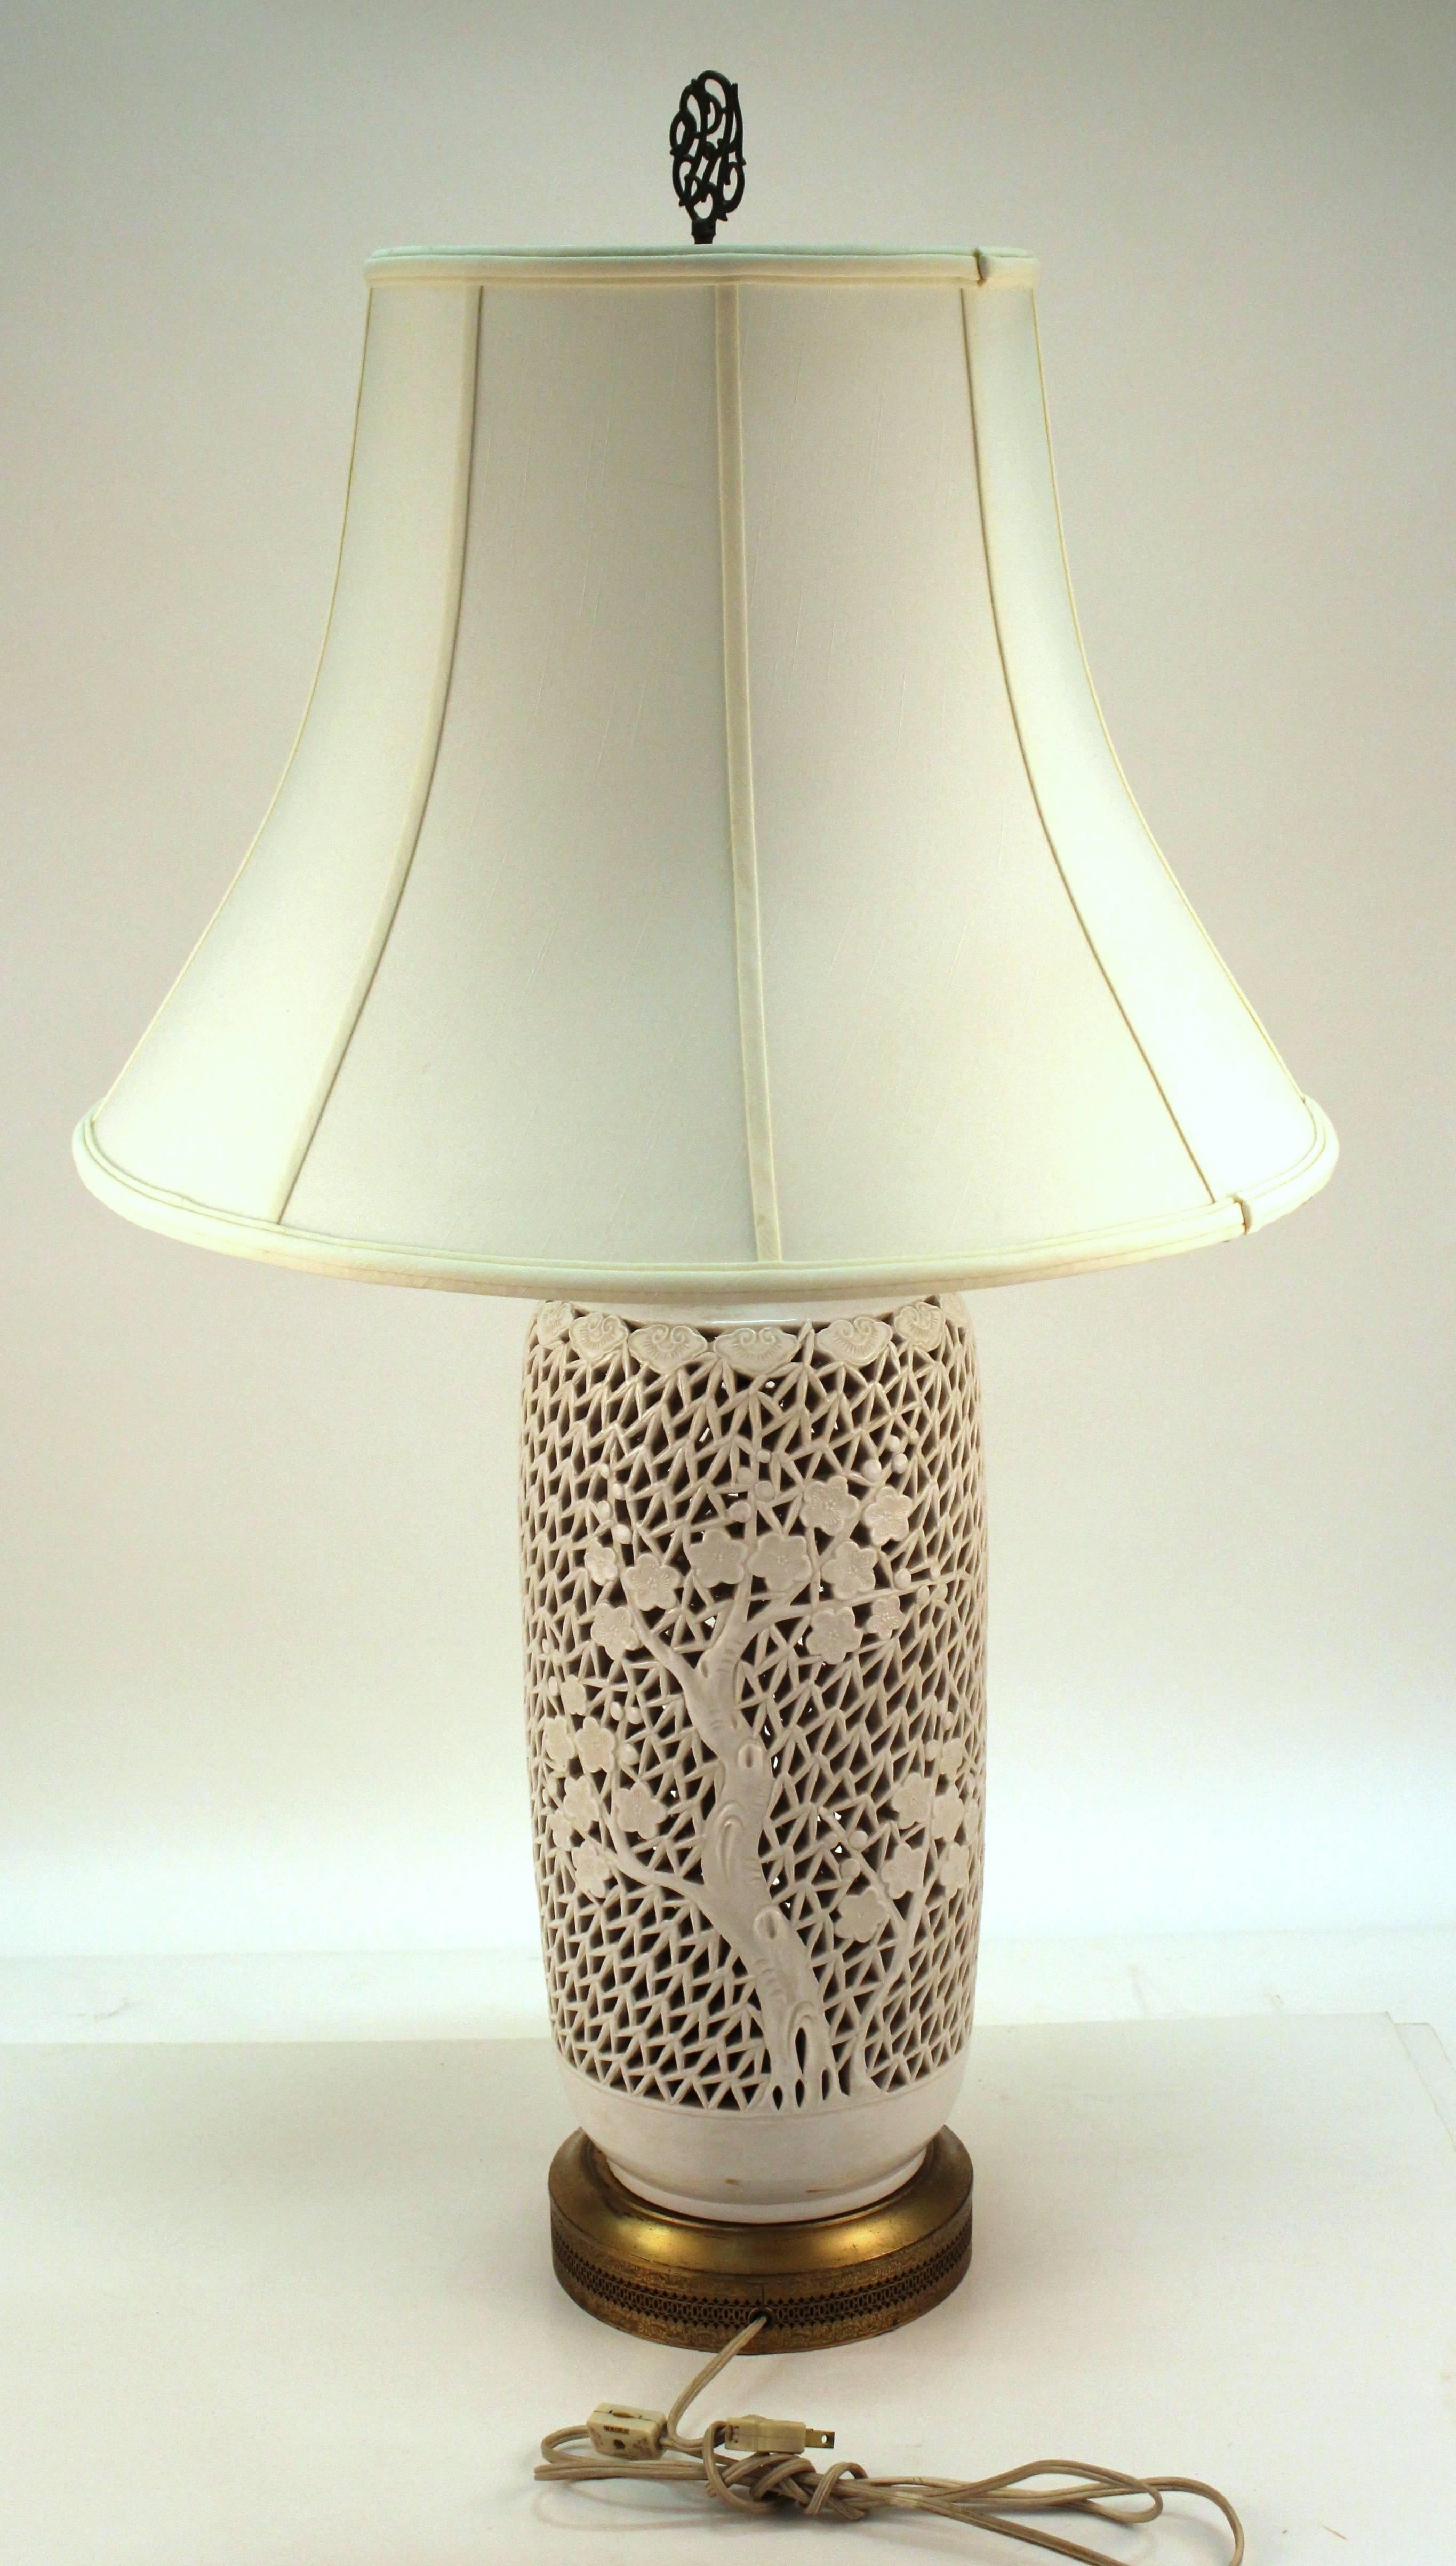 1920s blanc de chine ceramic table lamp in perforated blossom pattern. The brass base also features cutout detailing as well as a decorative etched pattern. In very good condition. 111229.